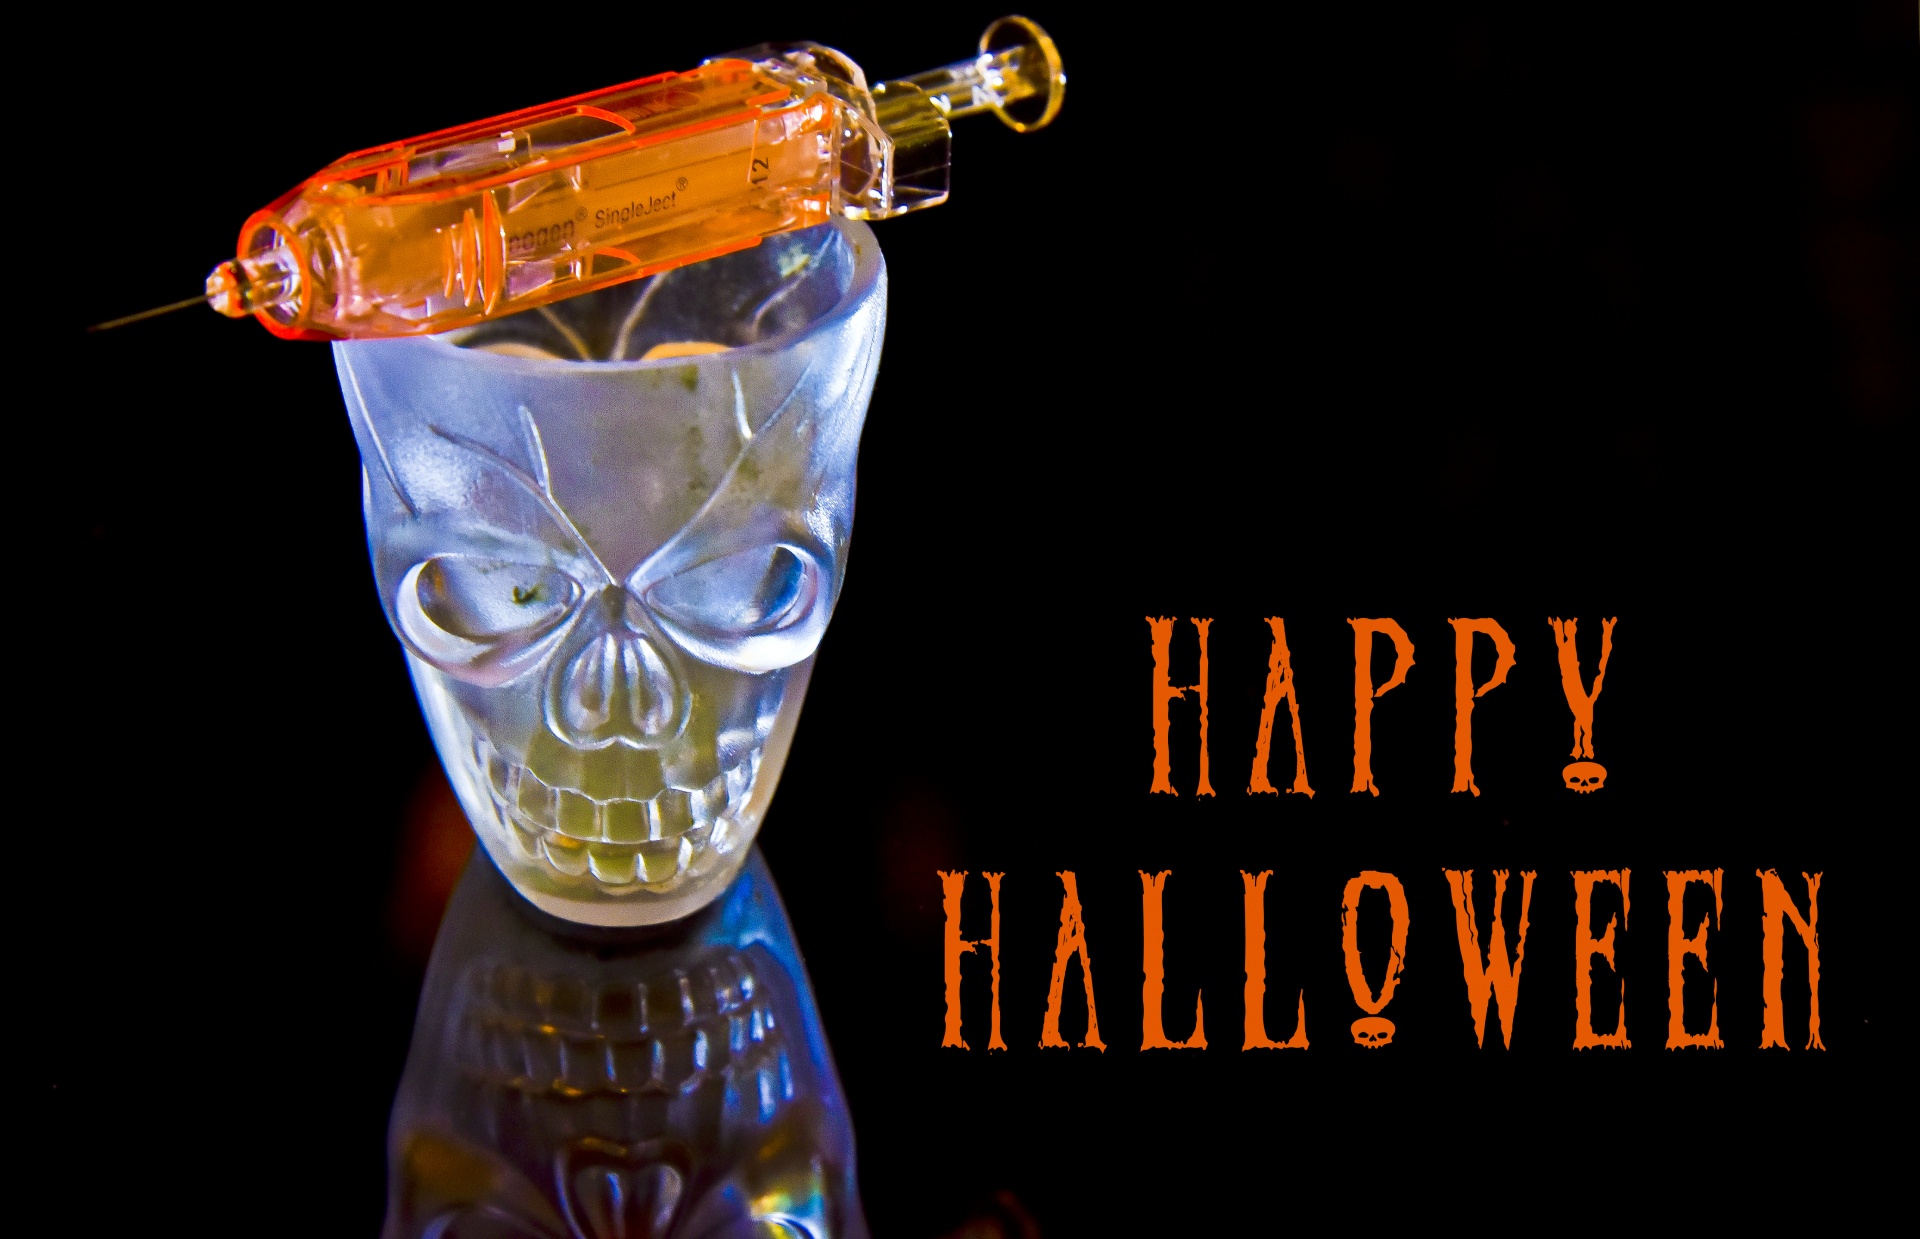 Skull shotglass and hypodermic needle against a black background Happy Halloween greeting